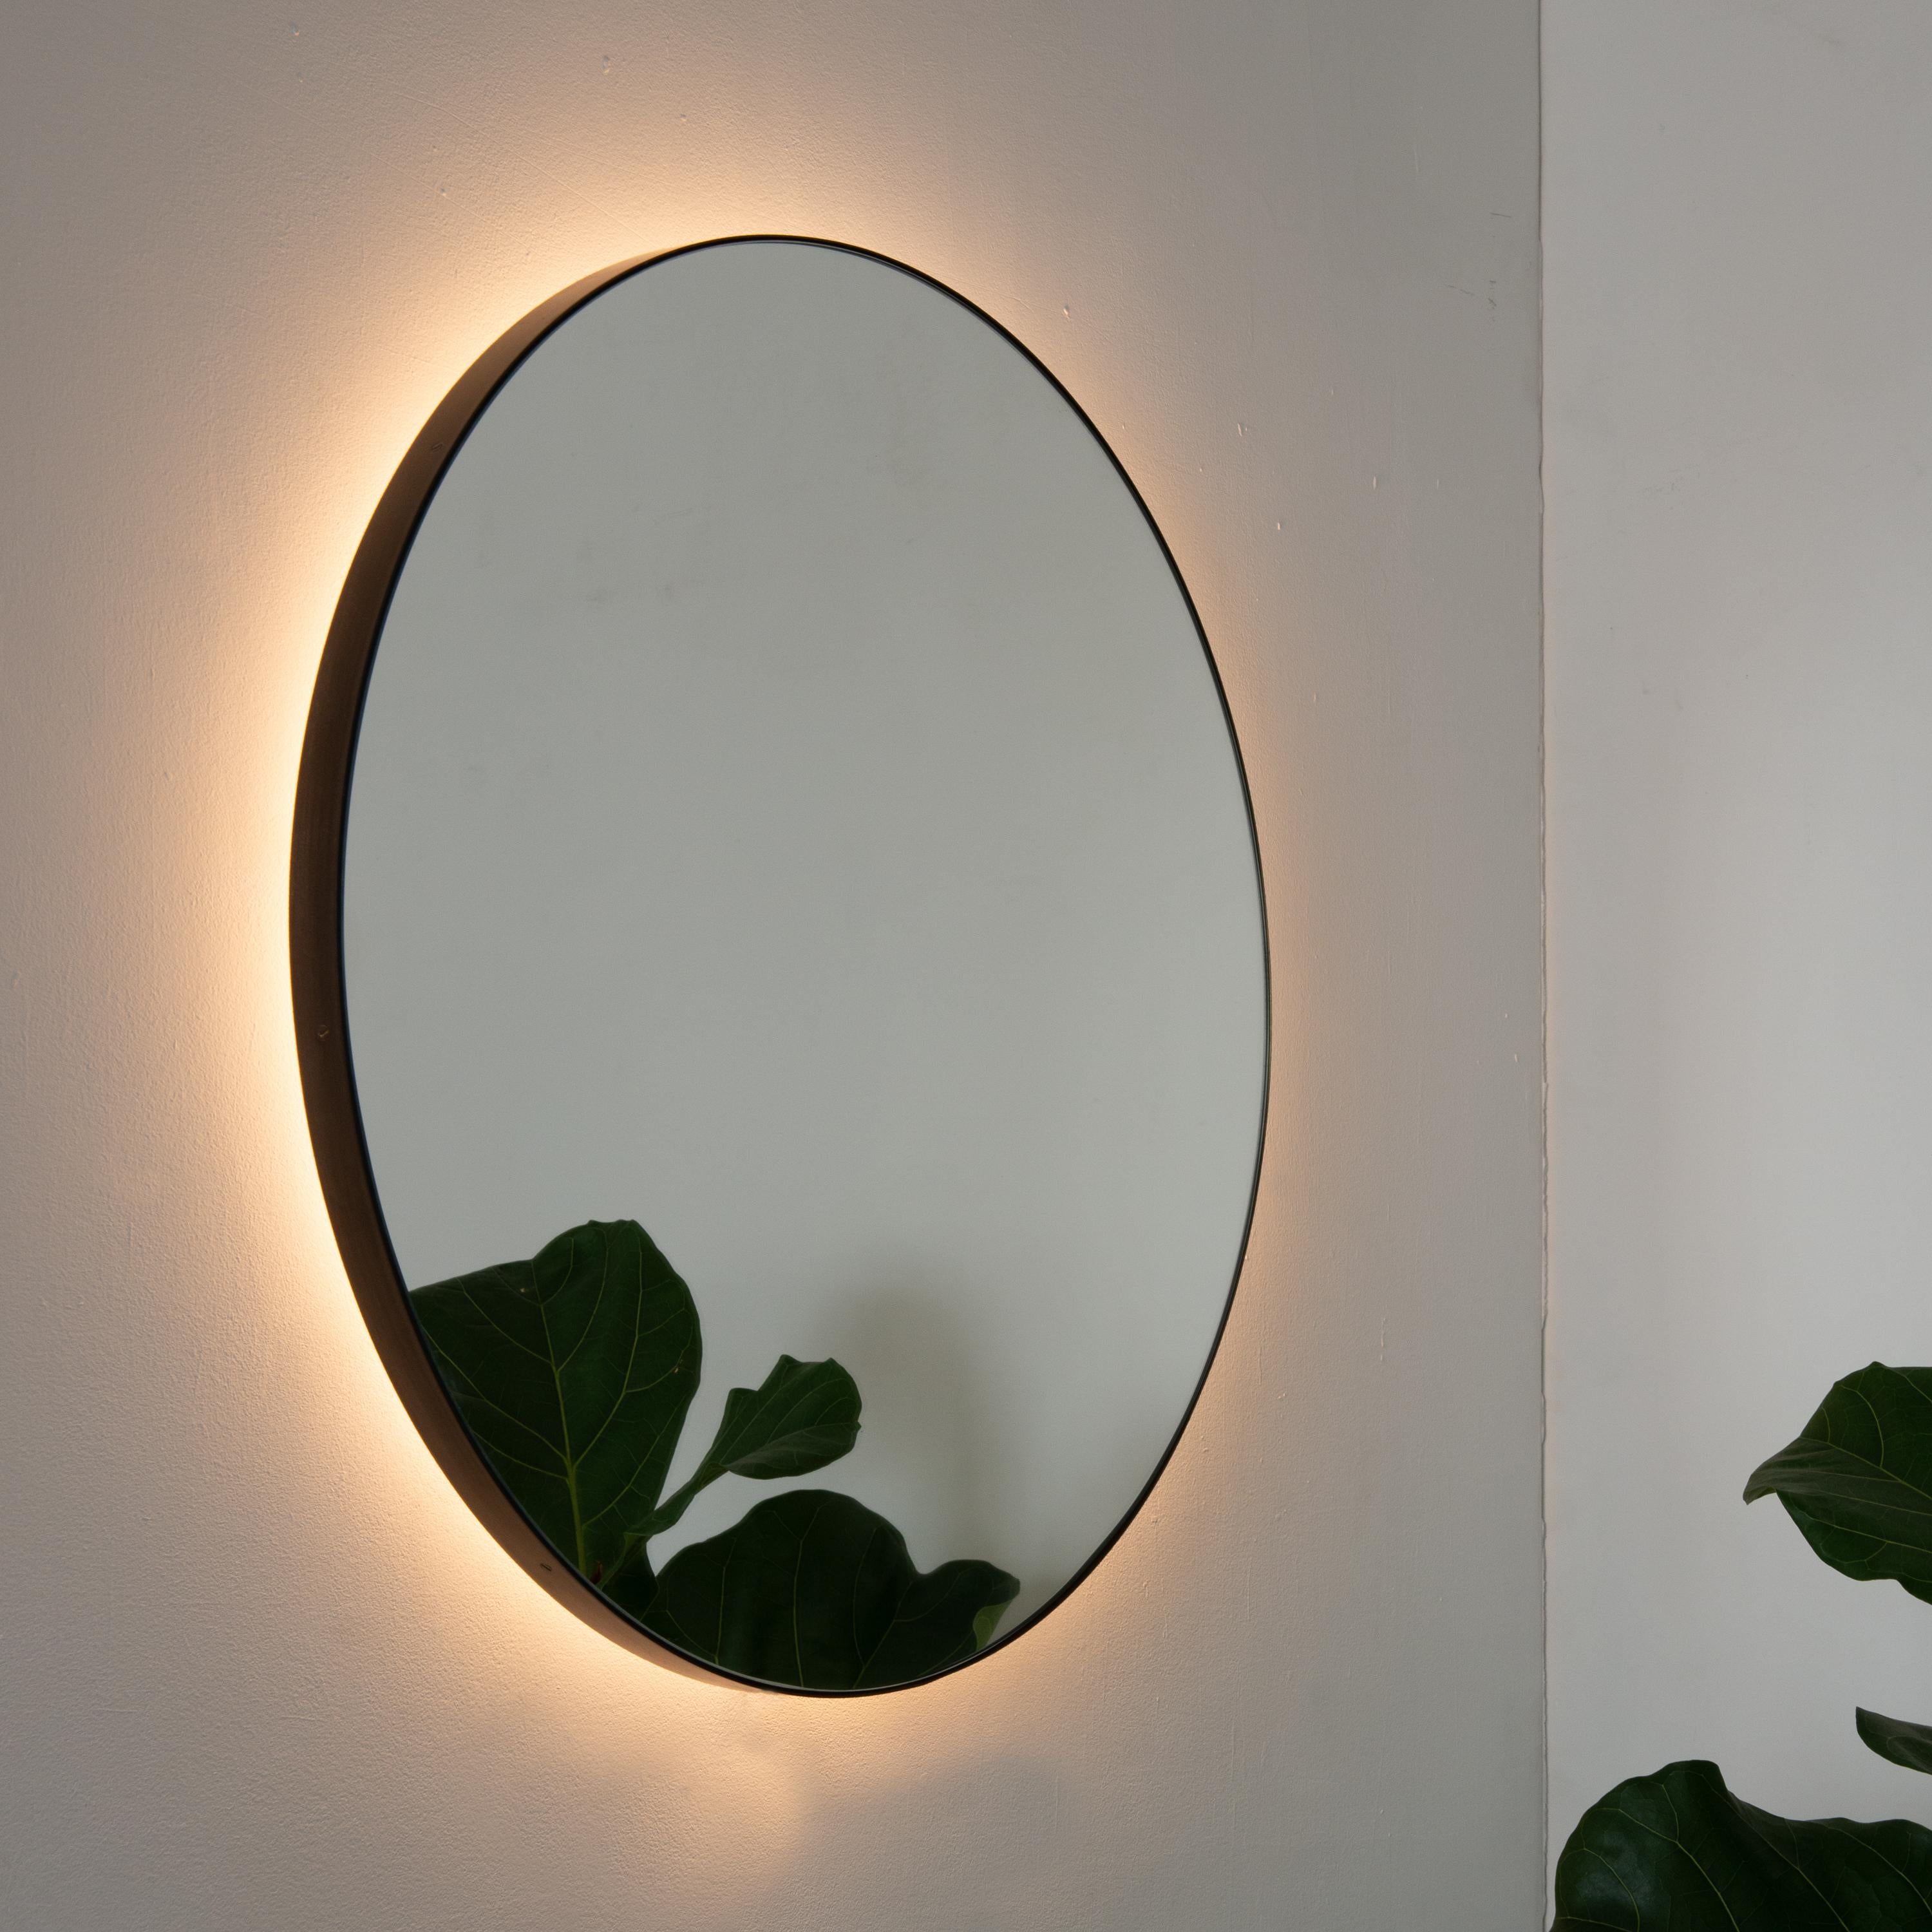 Minimalist round mirror with an elegant bronze patina brass frame. Designed and handcrafted in London, UK.

Fitted with a brass hook or an aluminium z-bar depending on the size of the mirror. Also available on demand with a split batten system to